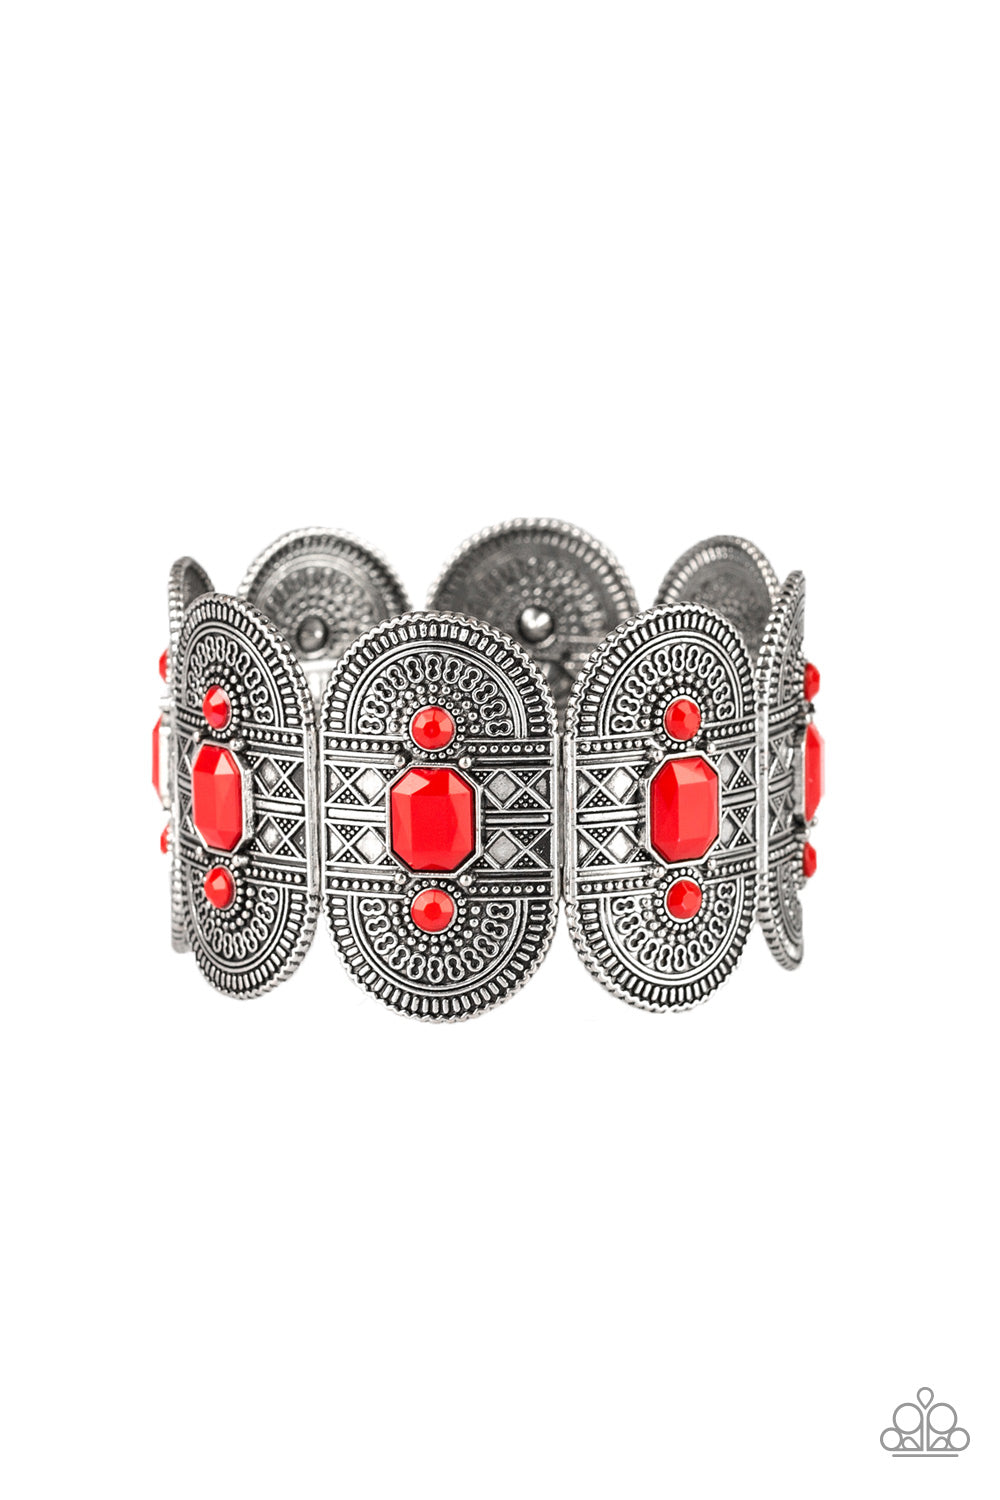 TURN UP THE TROPICAL HEAT - RED BEADS TEXTURED SILVER STRETCH BRACELET